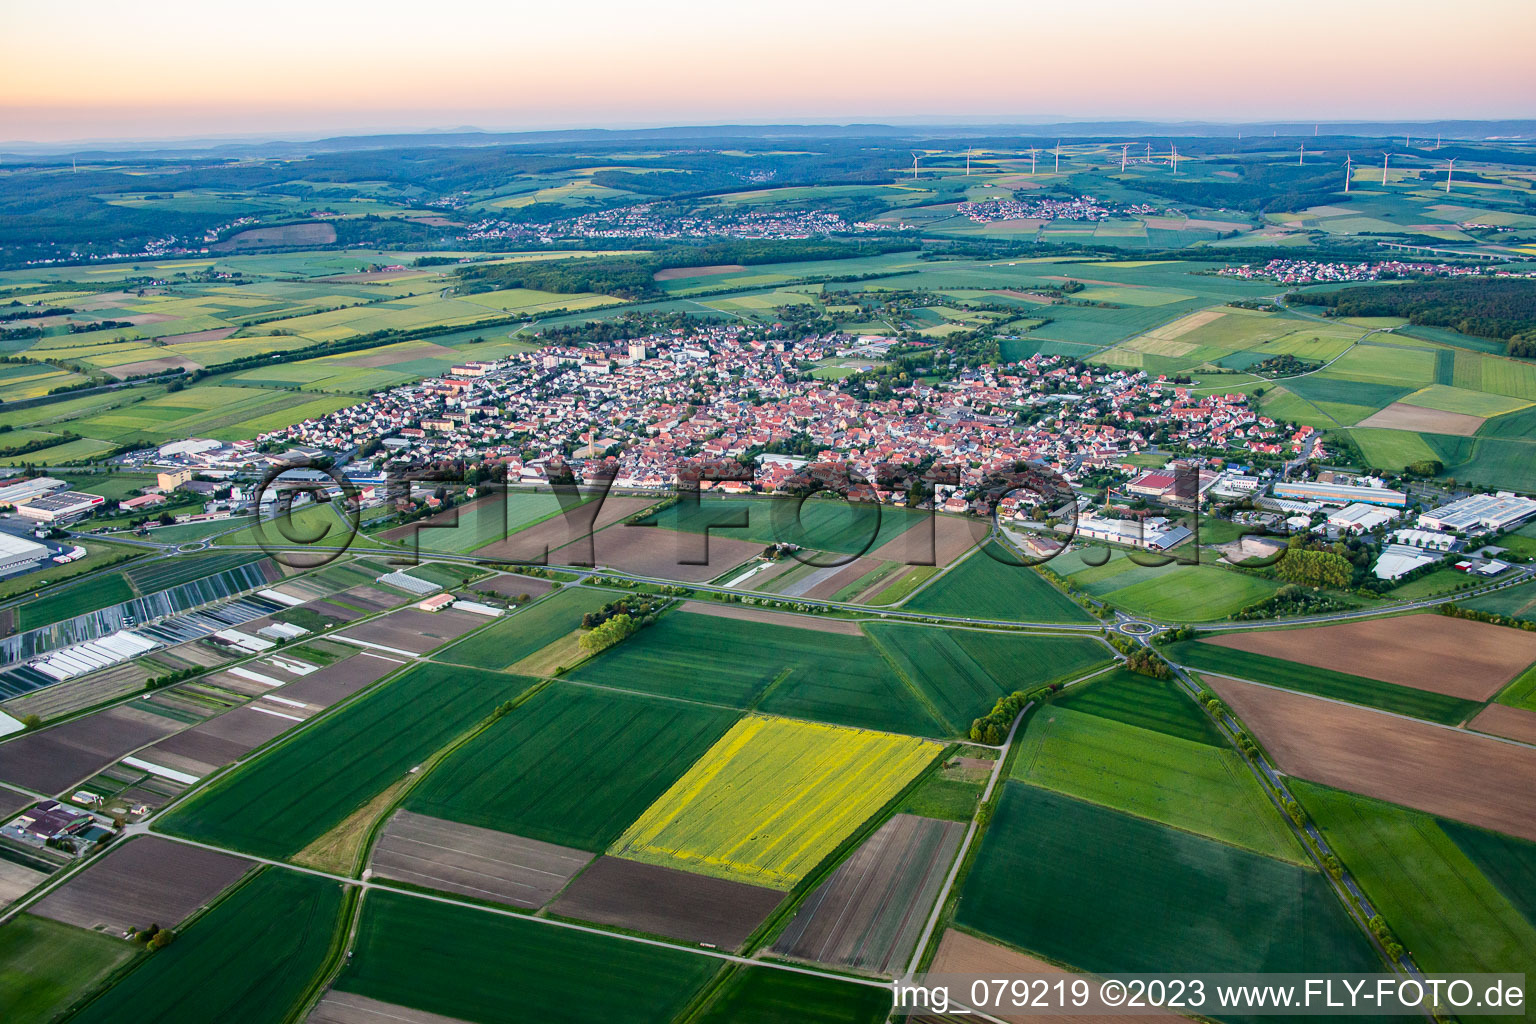 From the southwest in Gochsheim in the state Bavaria, Germany